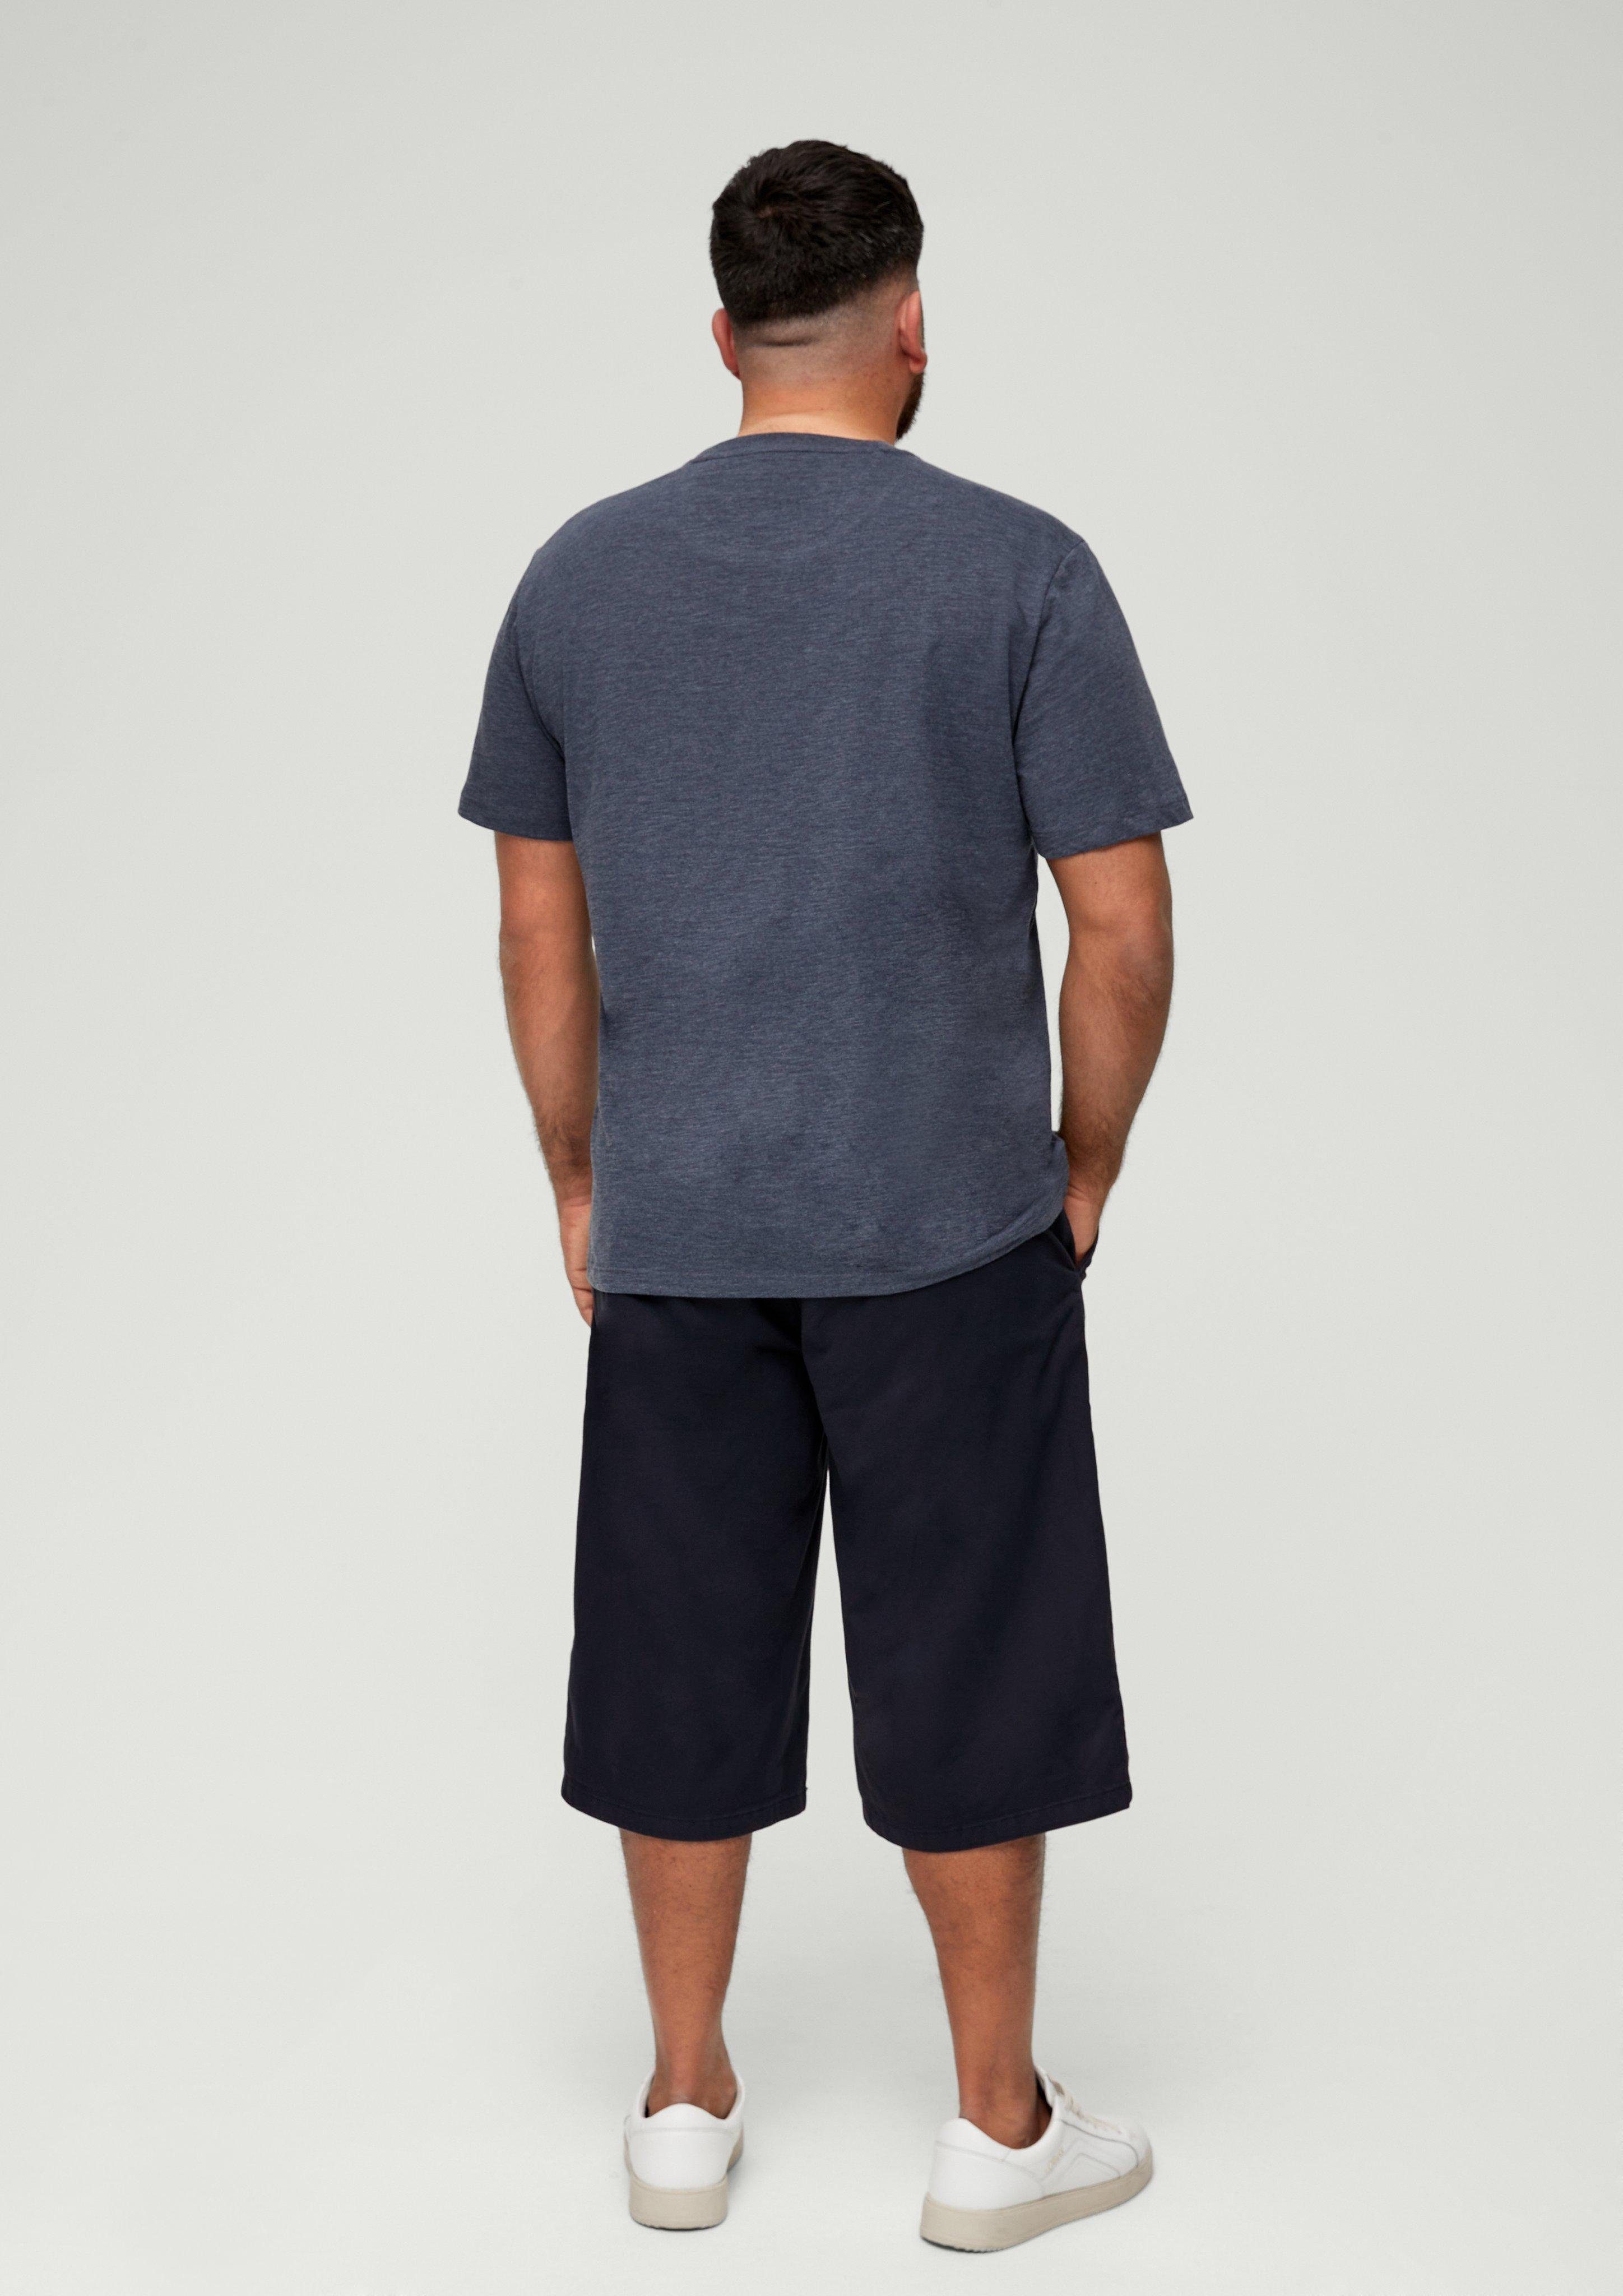 s.Oliver Stoffhose Tunnelzug navy mit Relaxed: Bermuda